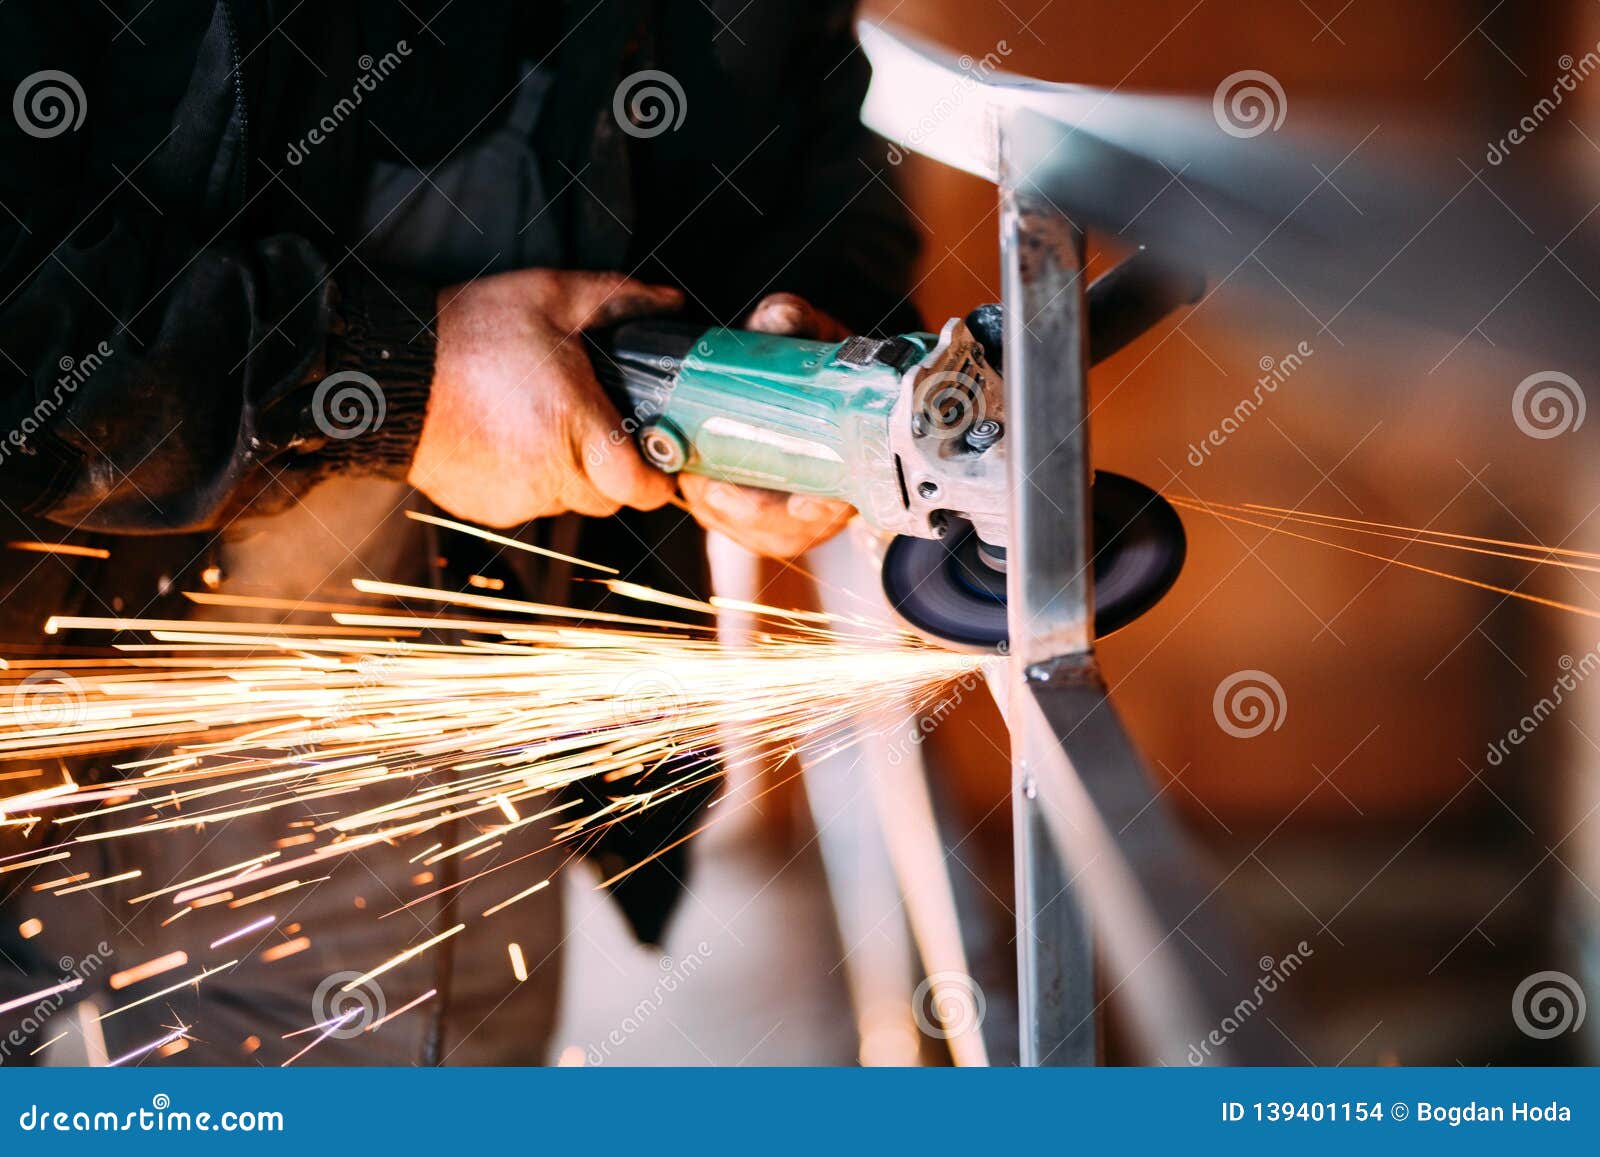 heavy industry worker cutting steel with angle grinder on construction site